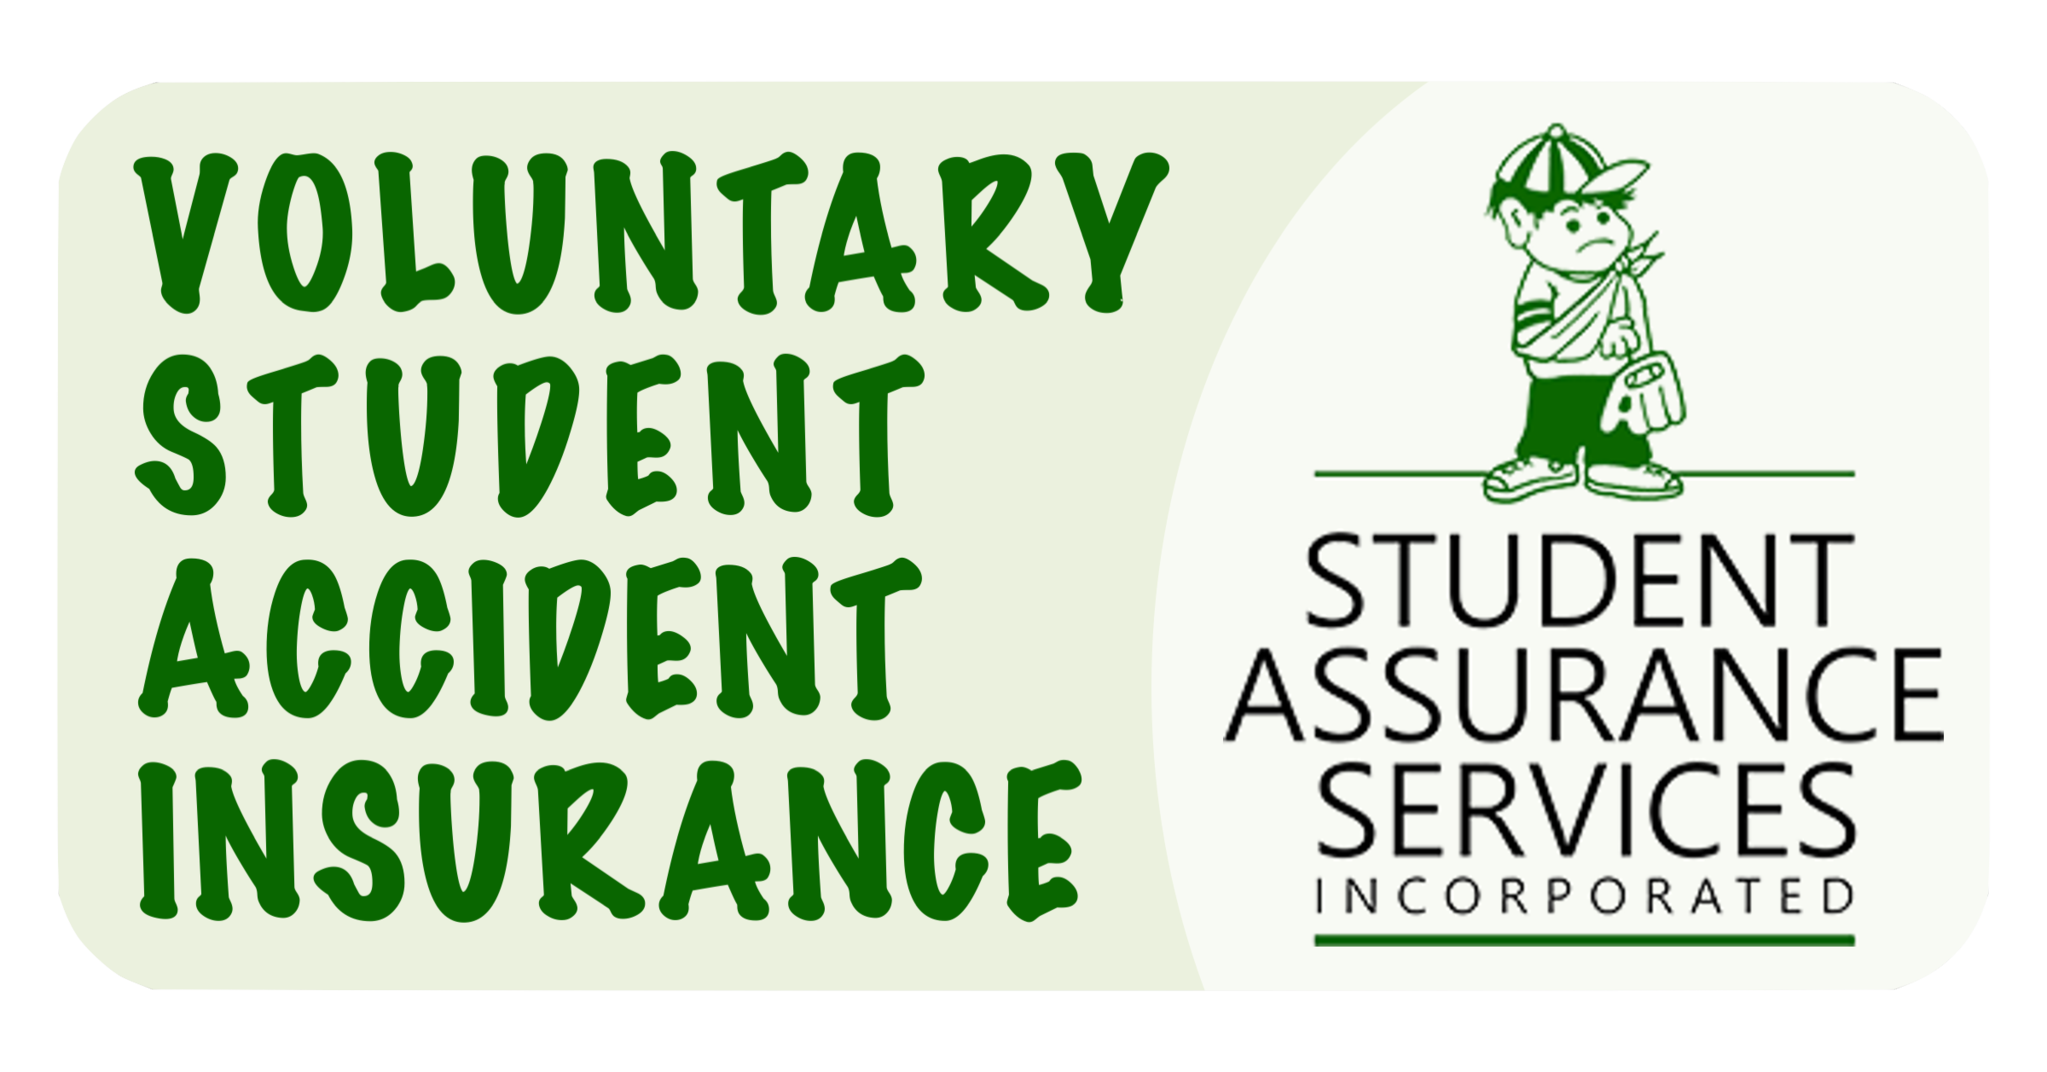 Link to Student Insurance Information